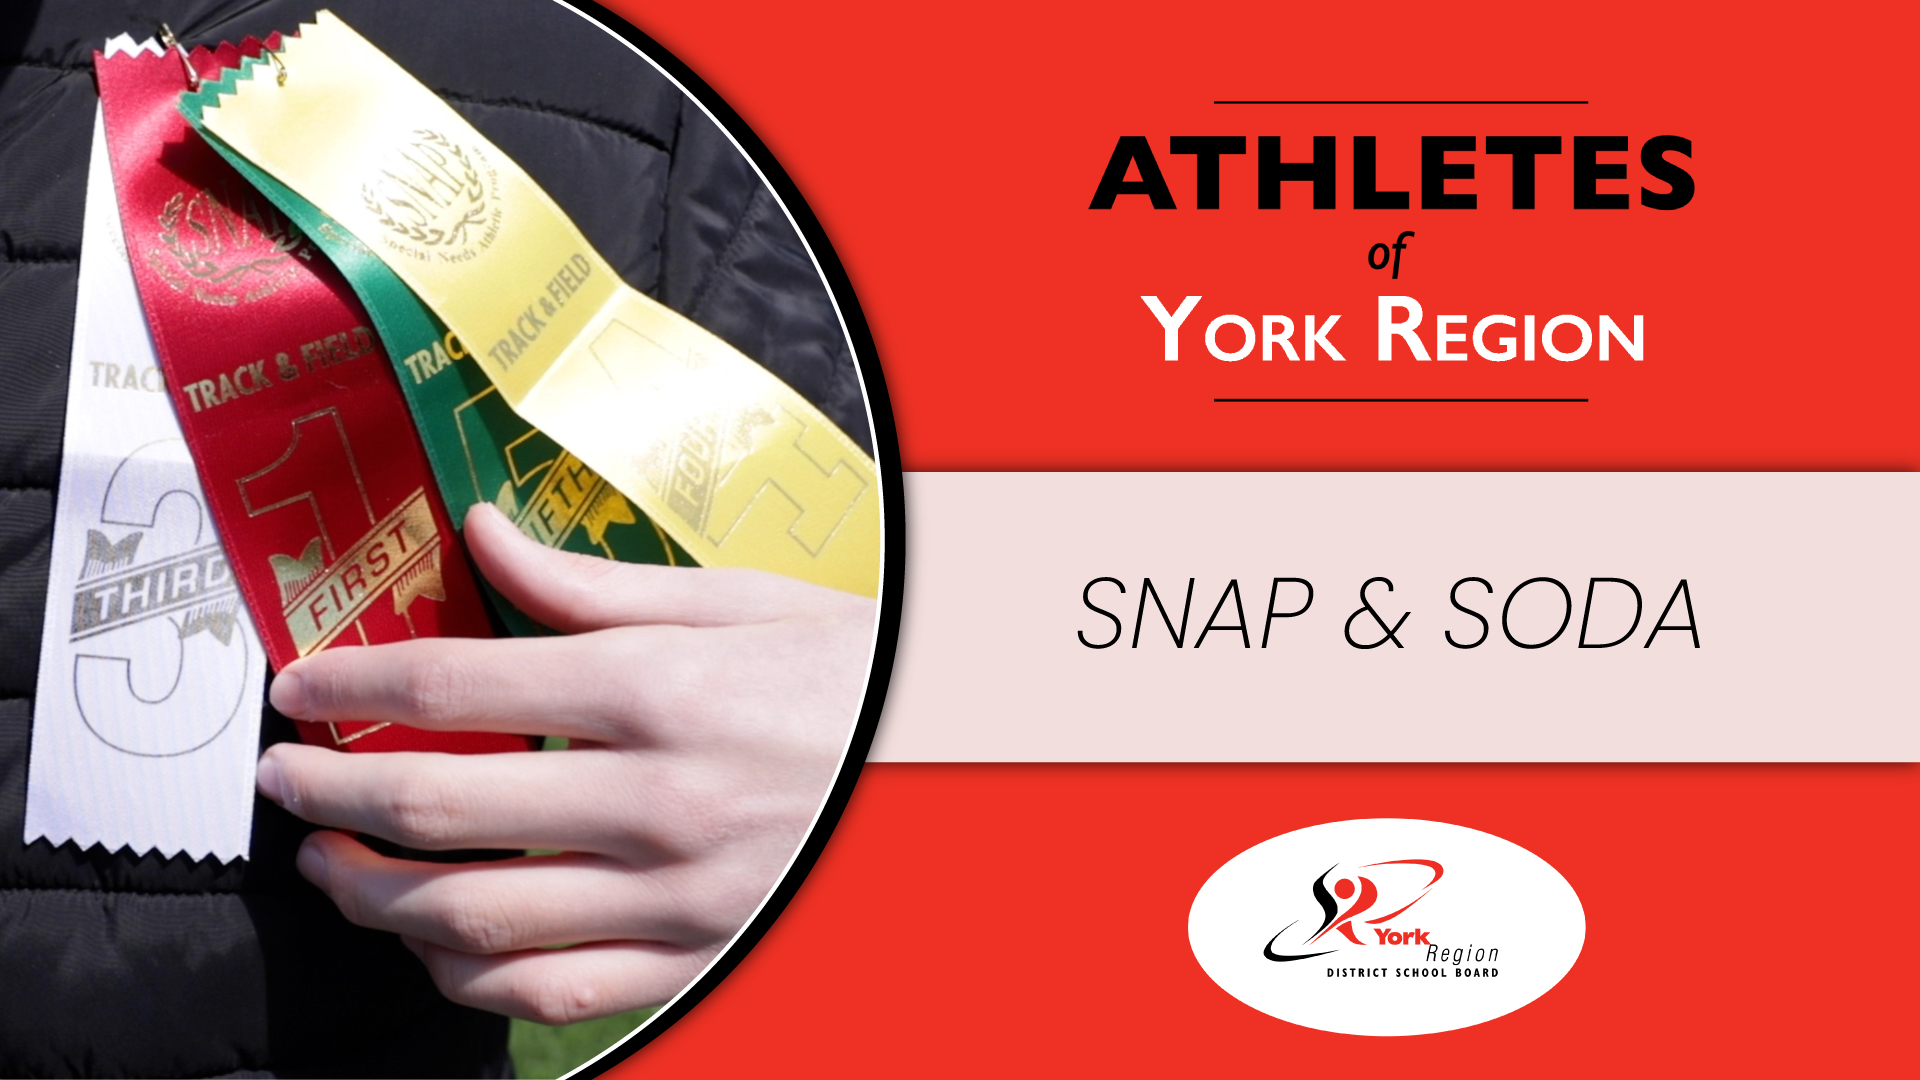 Four athletic ribbons, one white, one red, one green, one yellow beside red banner that reads Athletes of York Region: SNAP and SODA